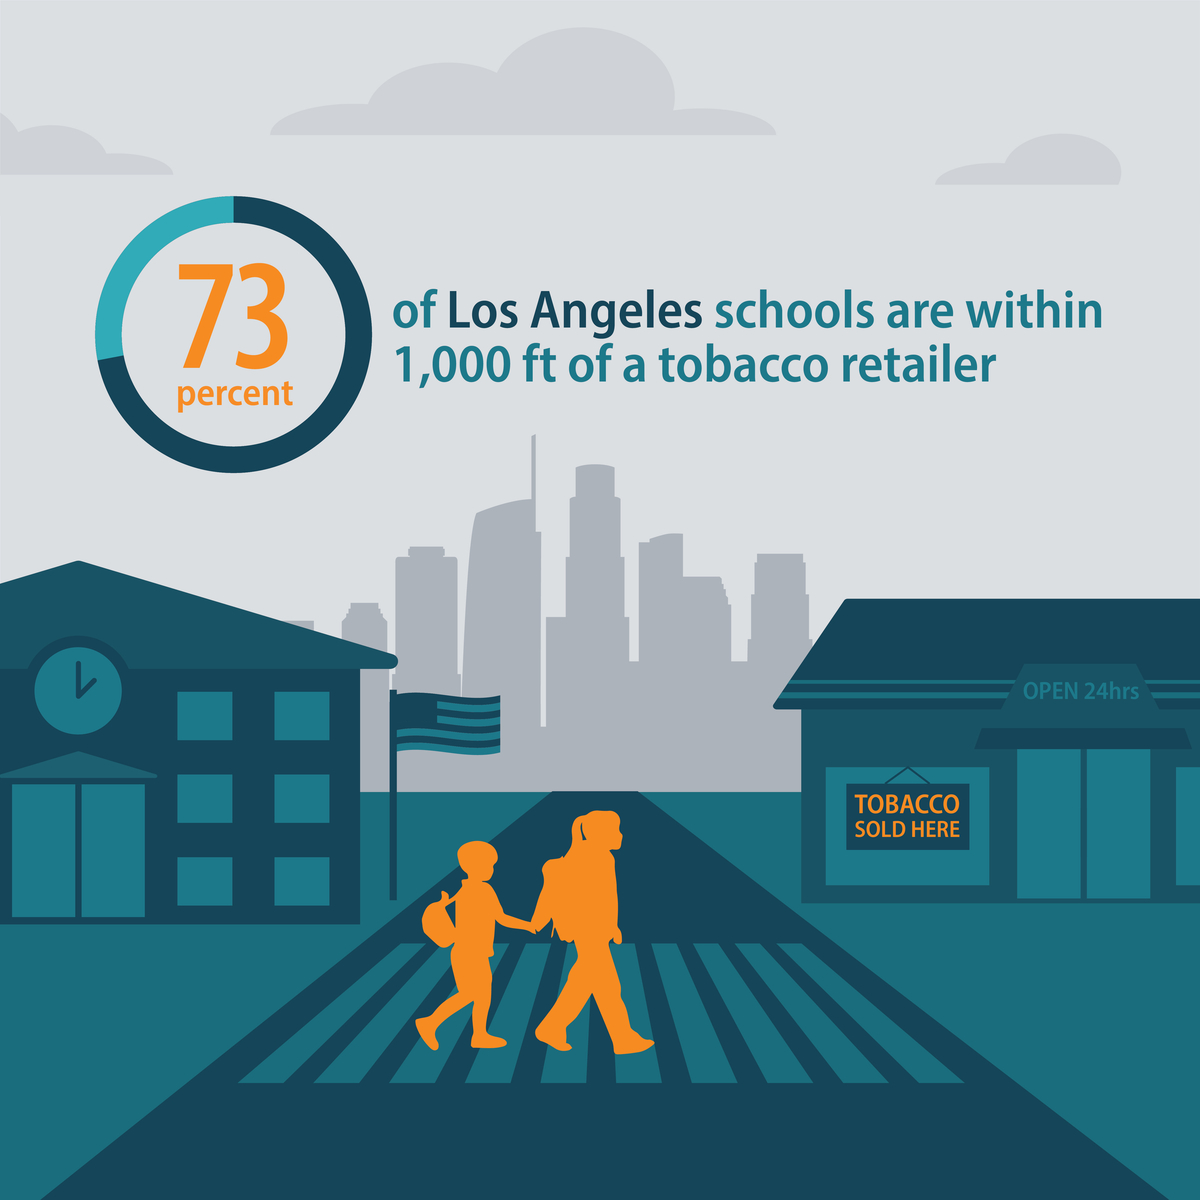 73 percent of Los Angeles schools are within 1,000 feet of a tobacco retailer